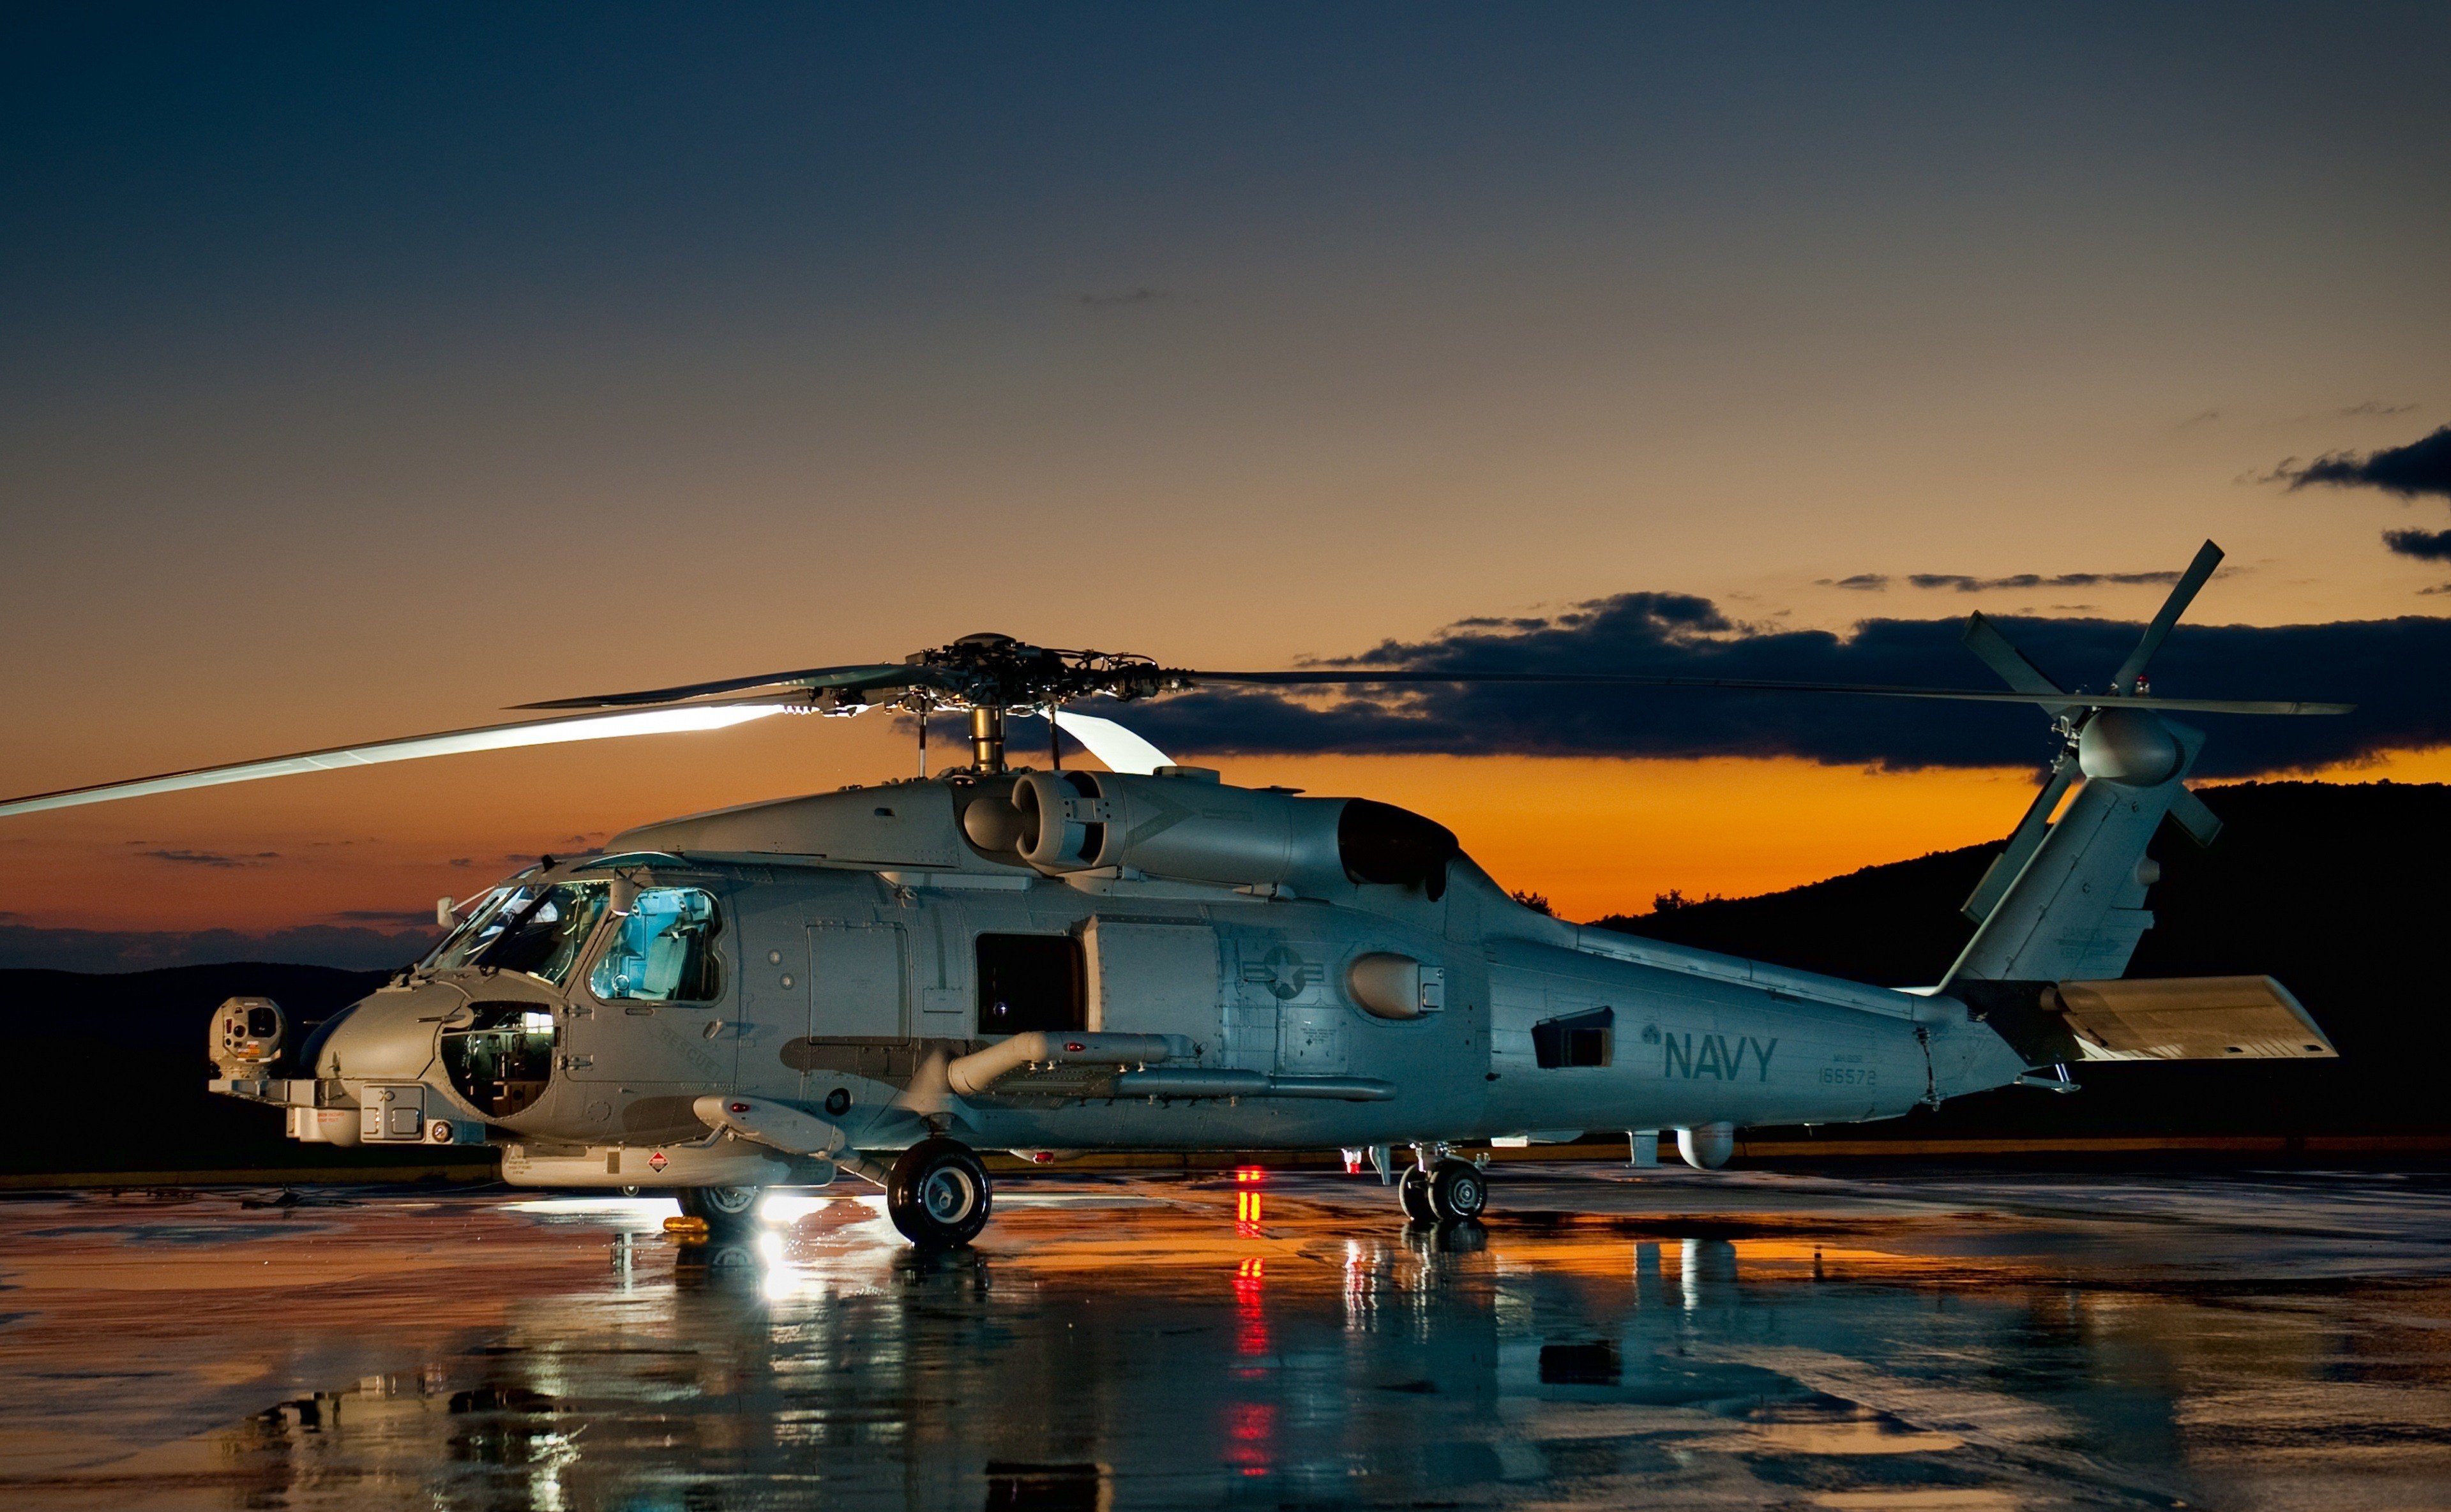 Wallpaper, vehicle, photography, United States Navy, aircraft, helicopters, dusk, Sikorsky UH 60 Black Hawk, air force, aviation, atmosphere of earth, helicopter rotor, rotorcraft, military helicopter 3839x2369